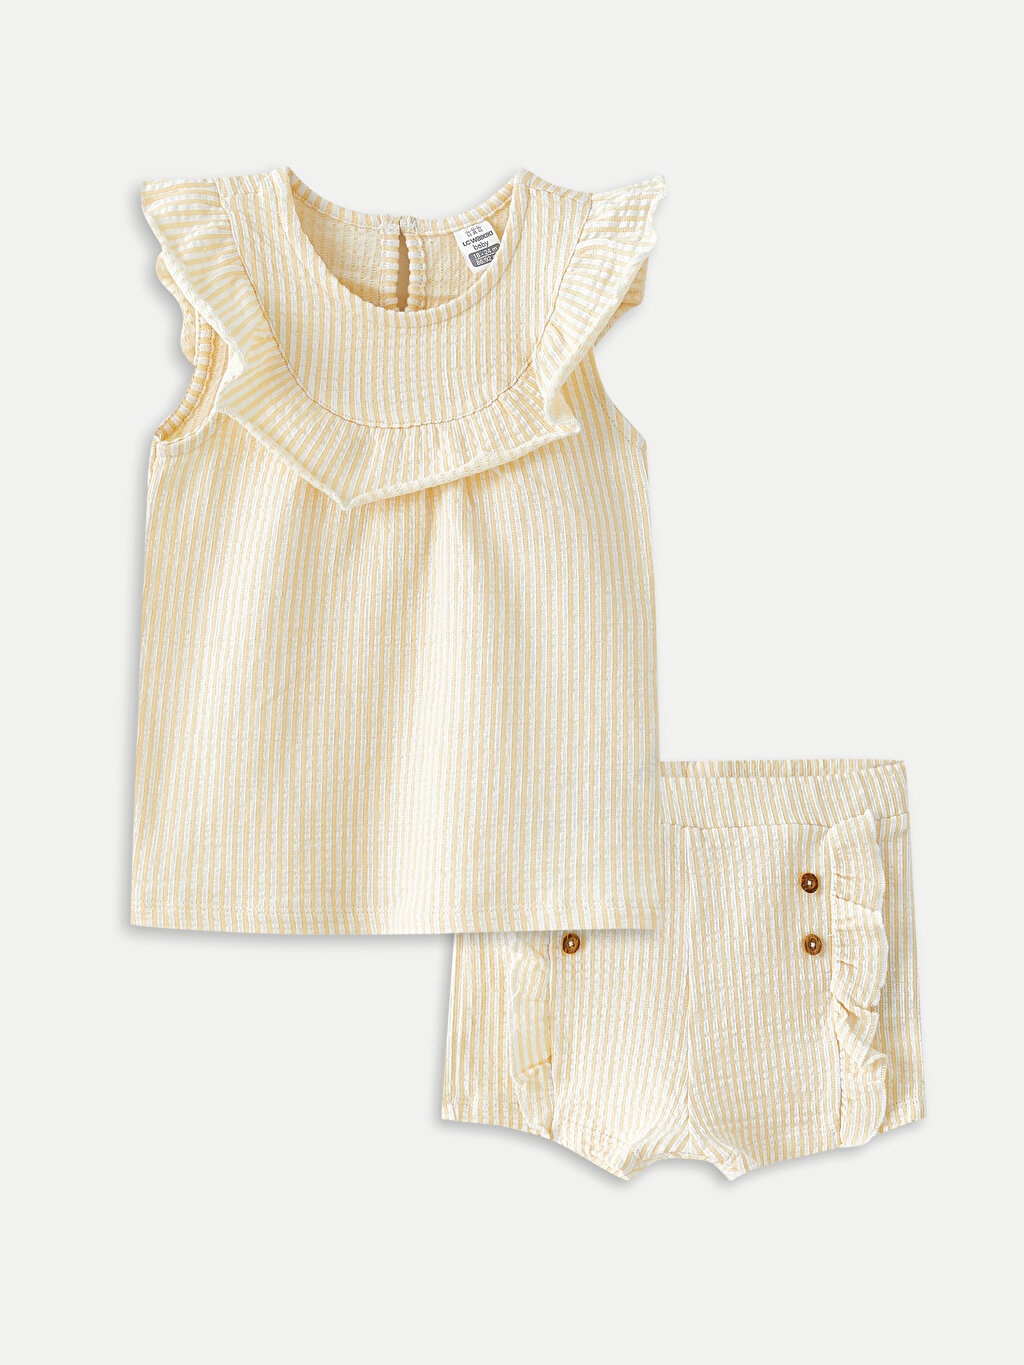 Crew Neck Striped Baby Girl Blouse and Shorts 2-Pack Set -S2FL68Z1-LKF -  S2FL68Z1-LKF - LC Waikiki